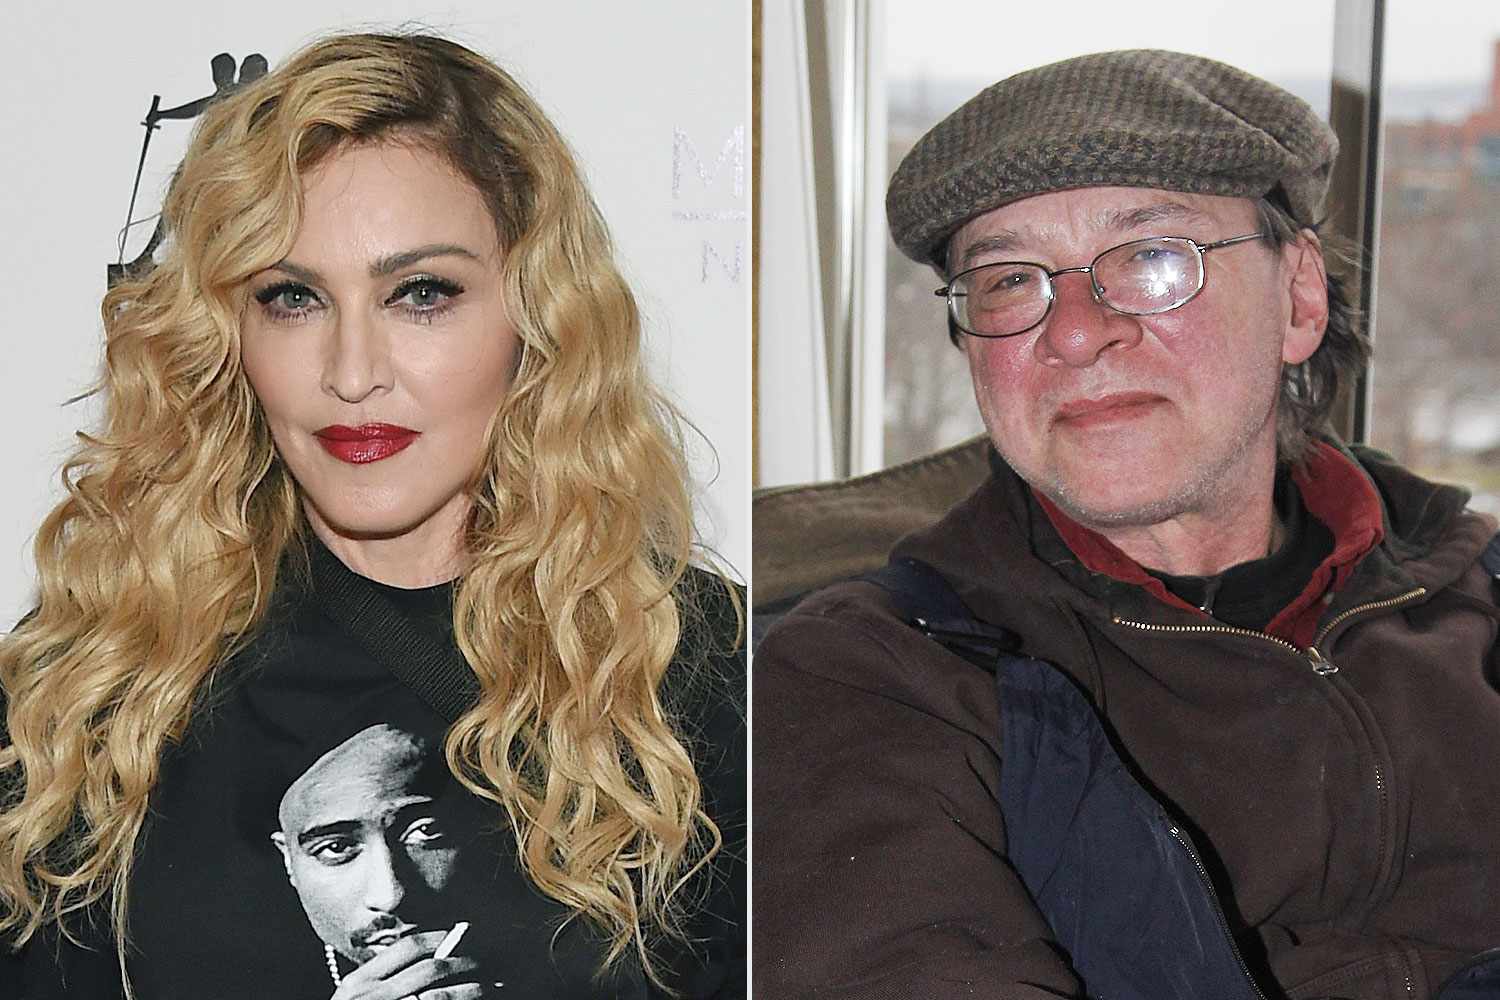 Madonna Thanks Late Brother Anthony Ciccone2019112539 Ceed6Cad51144076B0594B84056Ae02E